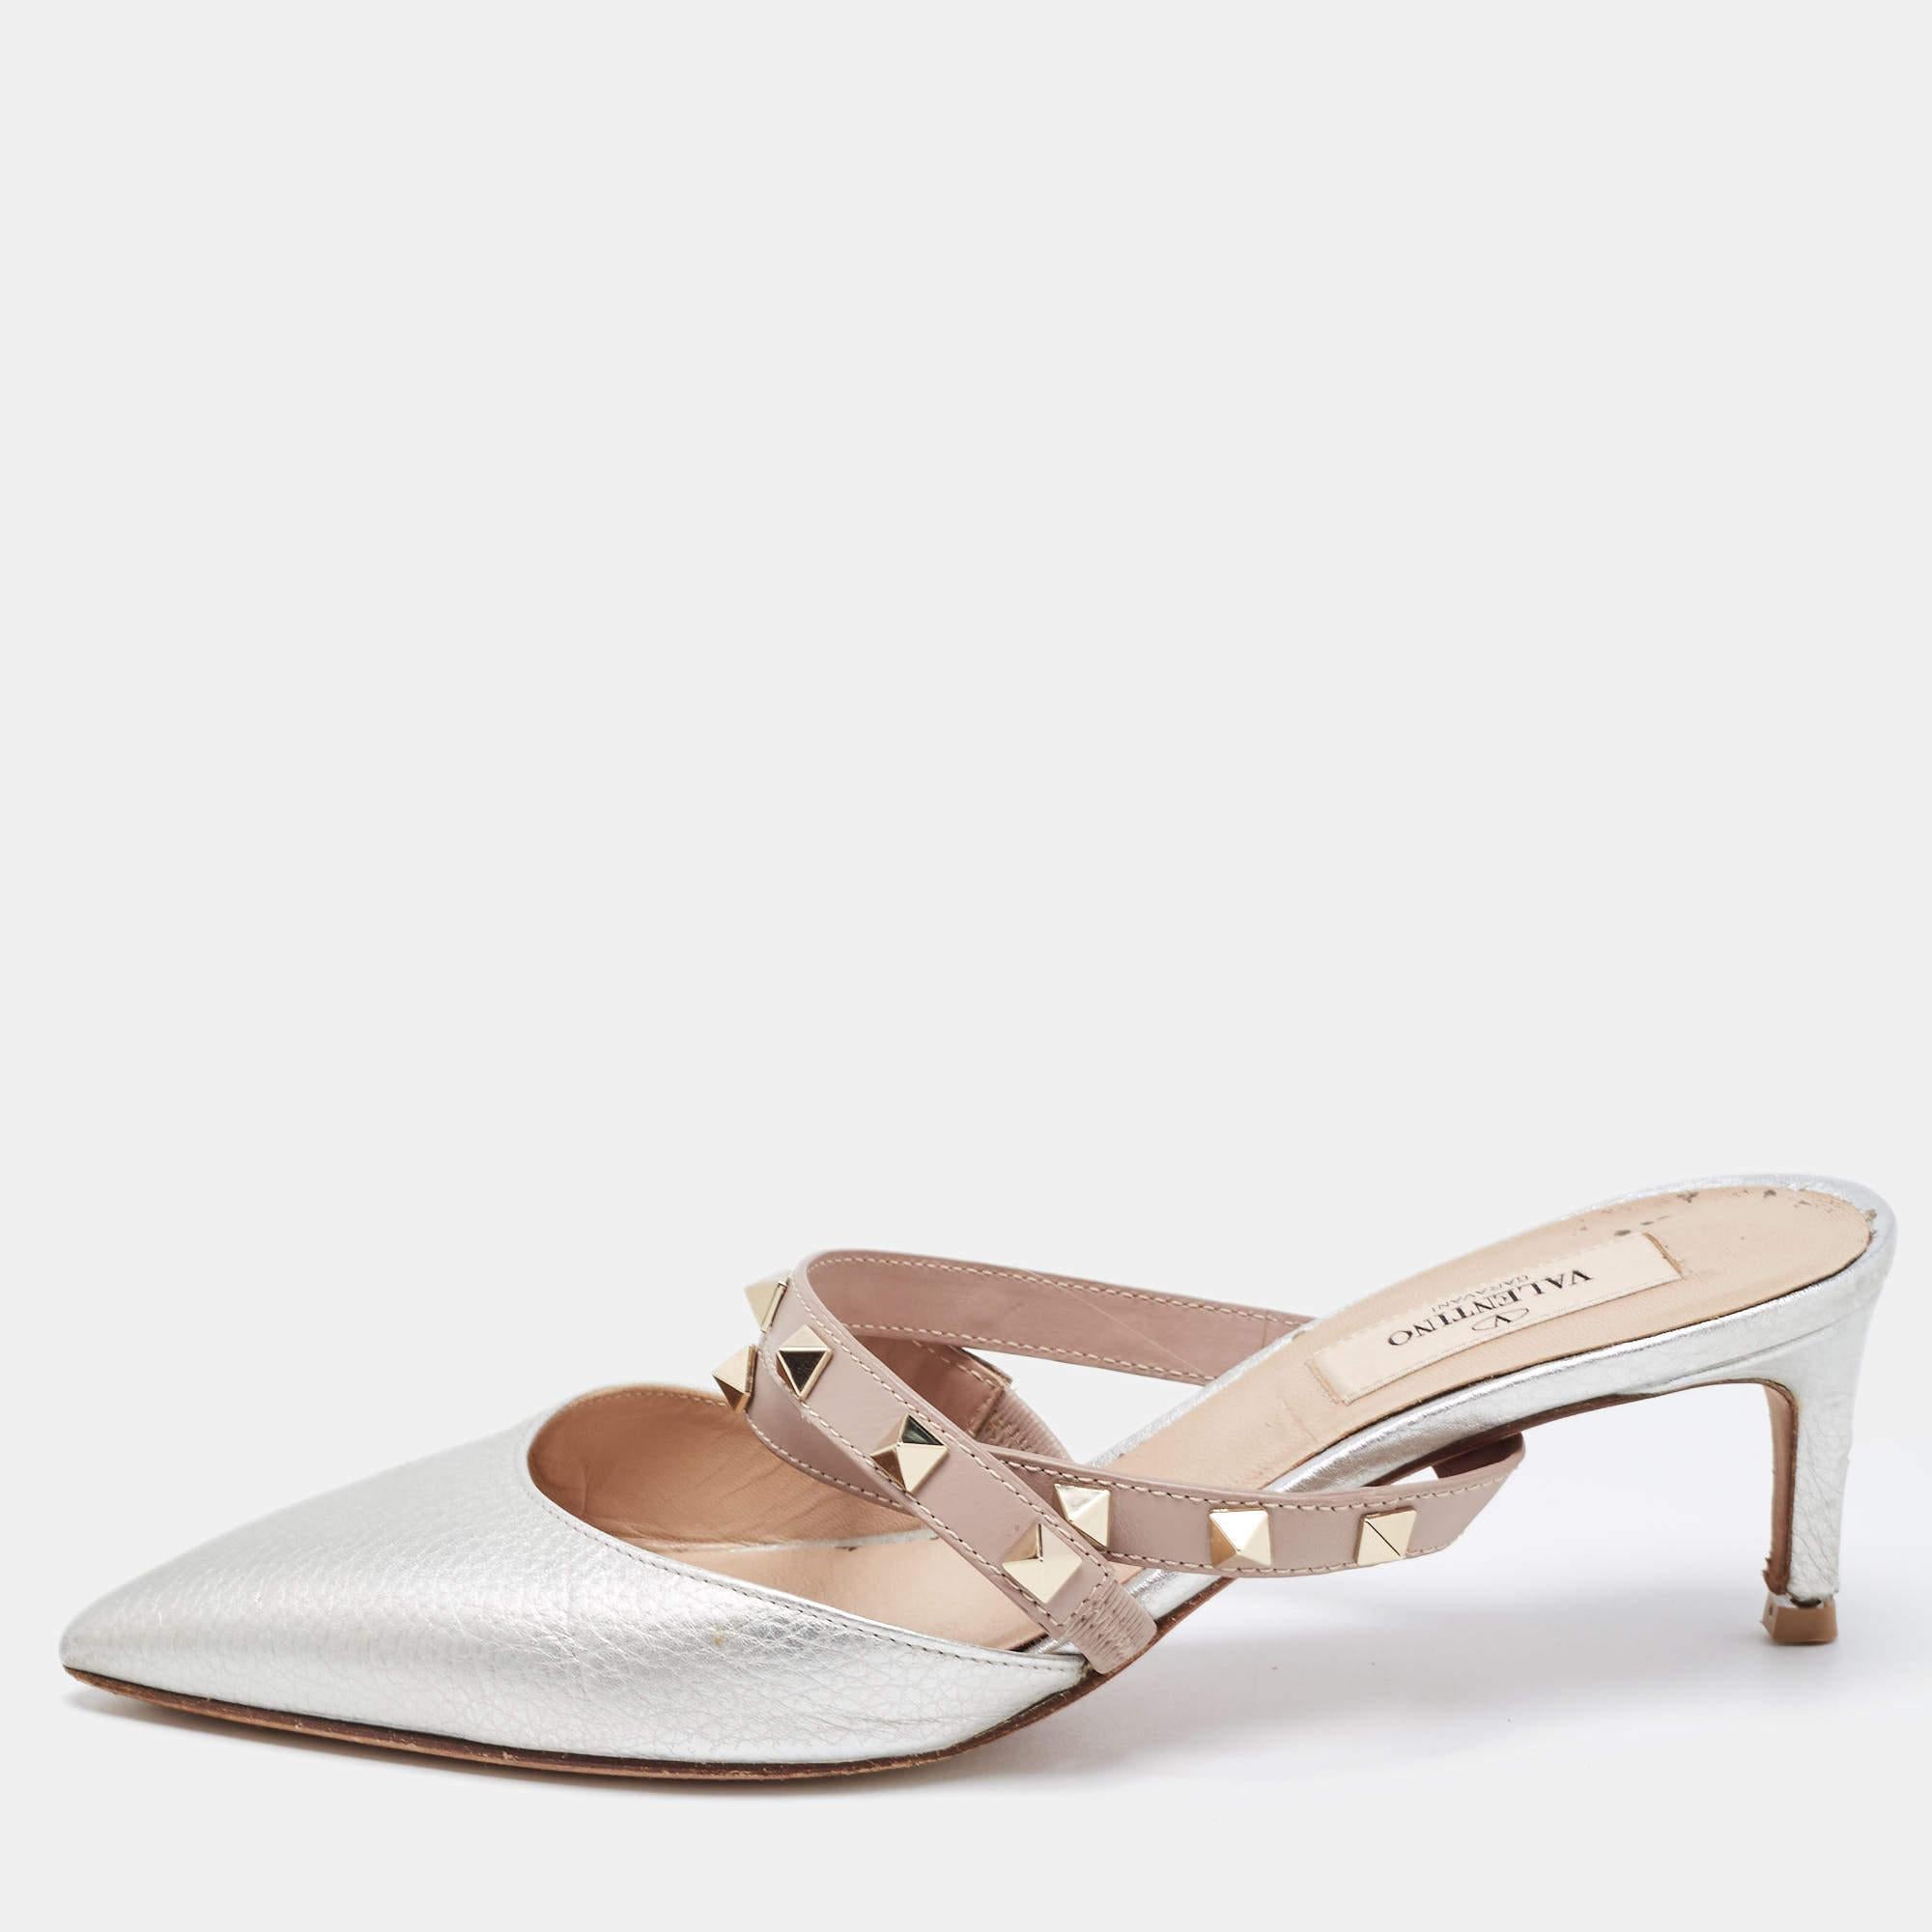 Valentino Silver/Beige Leather Rockstud Mules Size 37 3